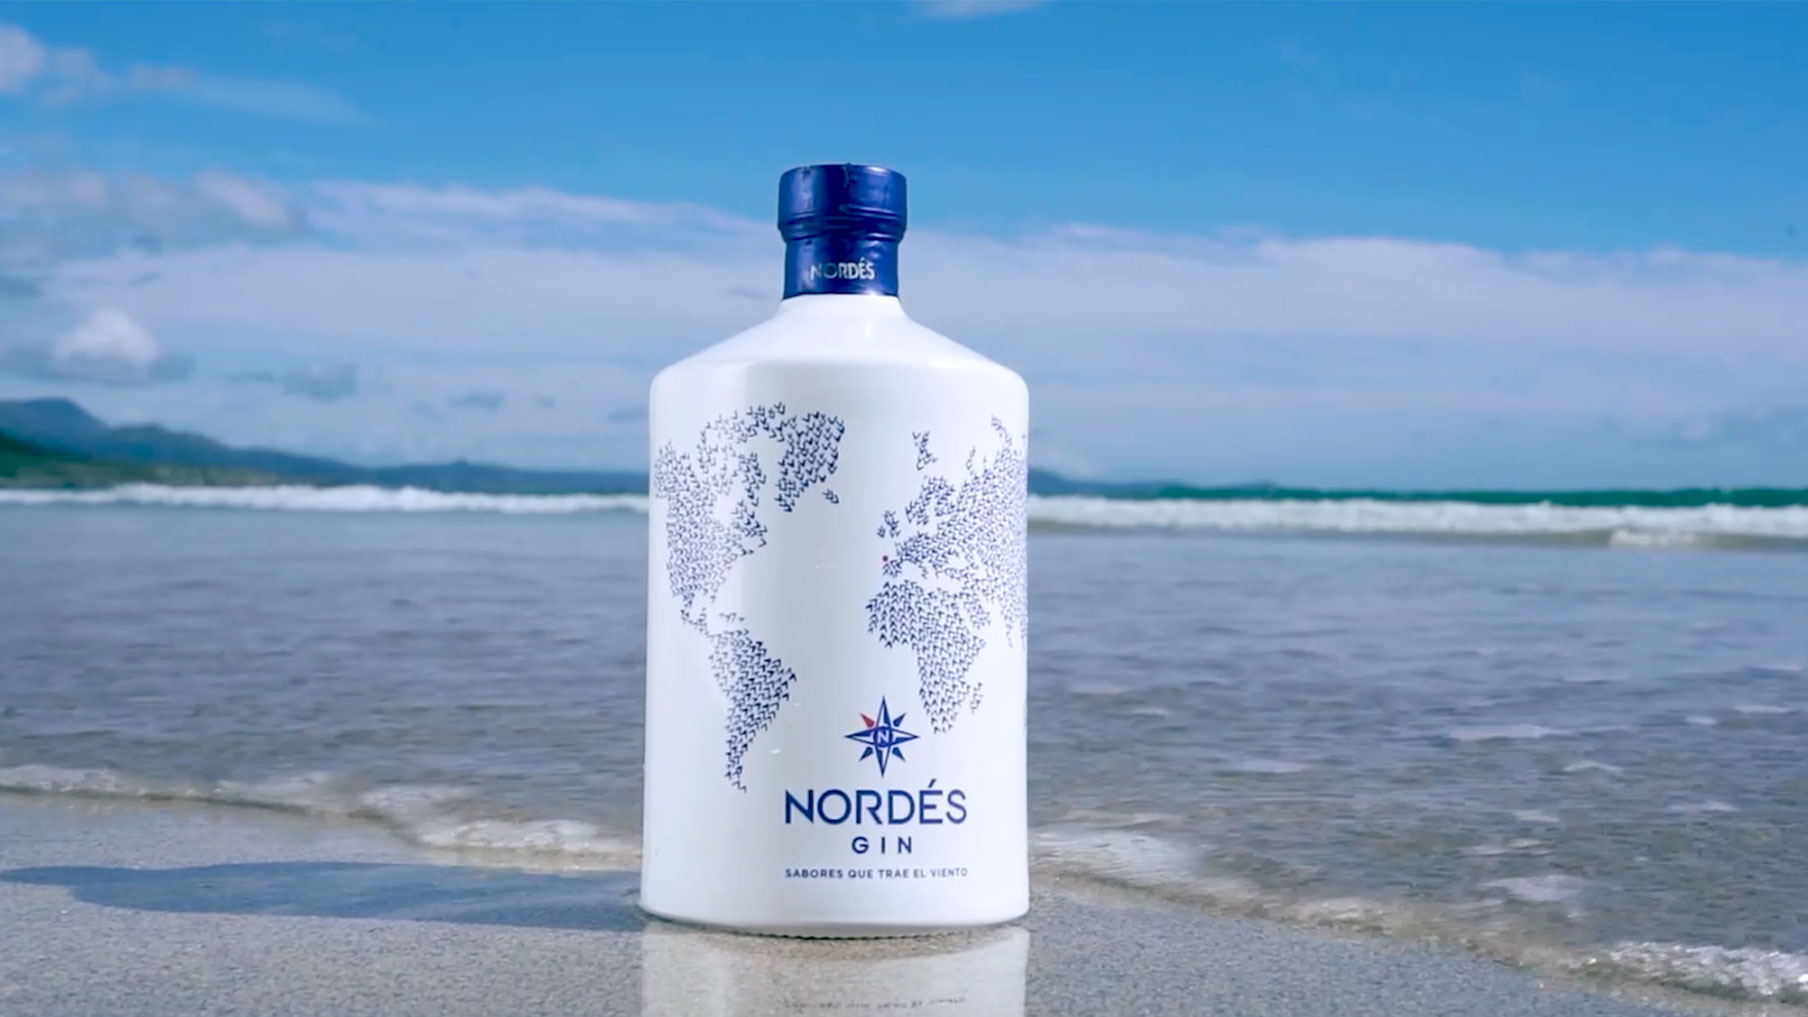 Nordés gin. A natural aroma and exquisite flavour | Nordés